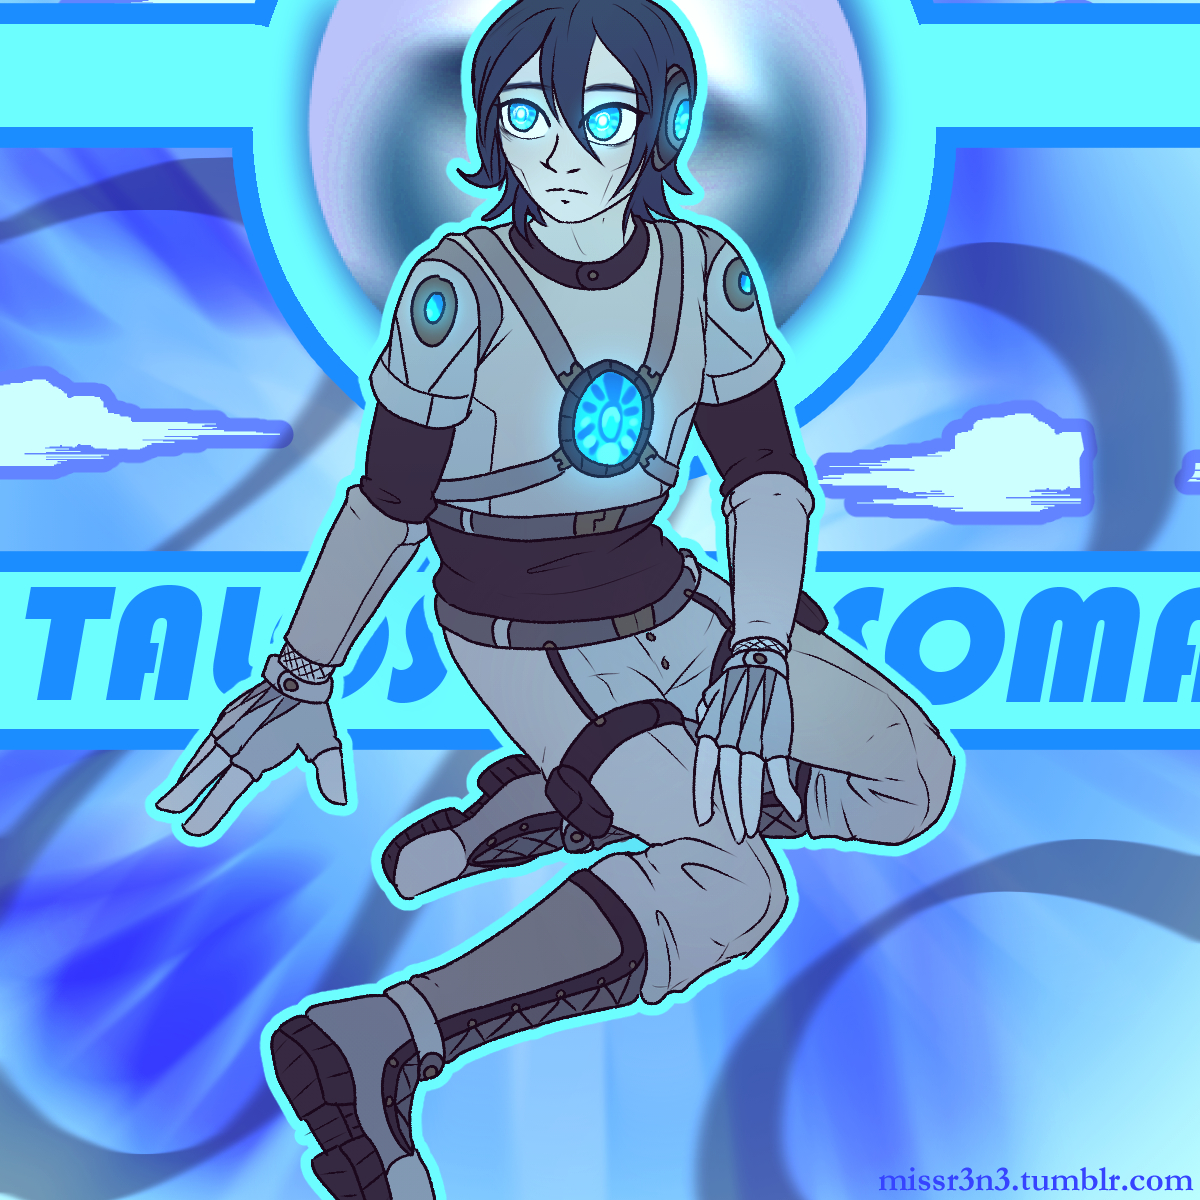 y2k anime style fanart of the robot from the talos principle 1, dressed in a cyberpunk style black and white outfit. text on the left of the andriod reads 'Talos', while text on the right reads 'Soma'